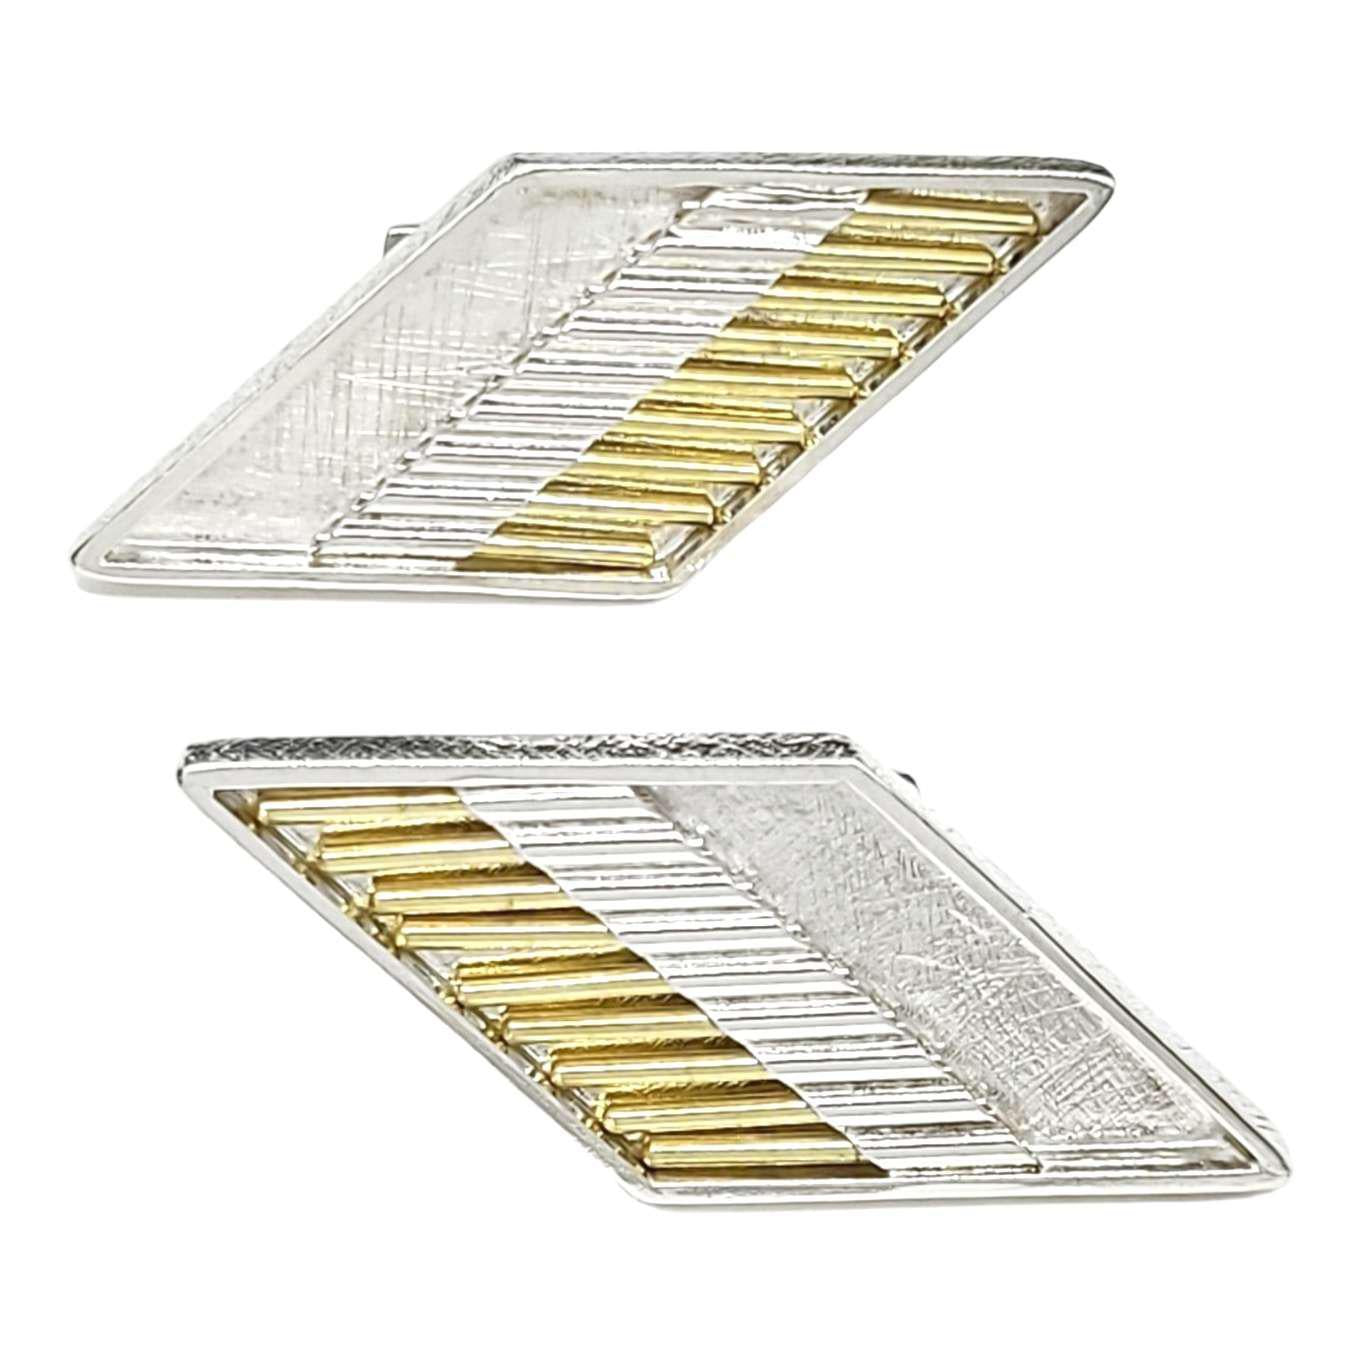 Cufflinks - Chevron in Bright Sterling Silver and 18k Yellow Gold by Dana C. Fear